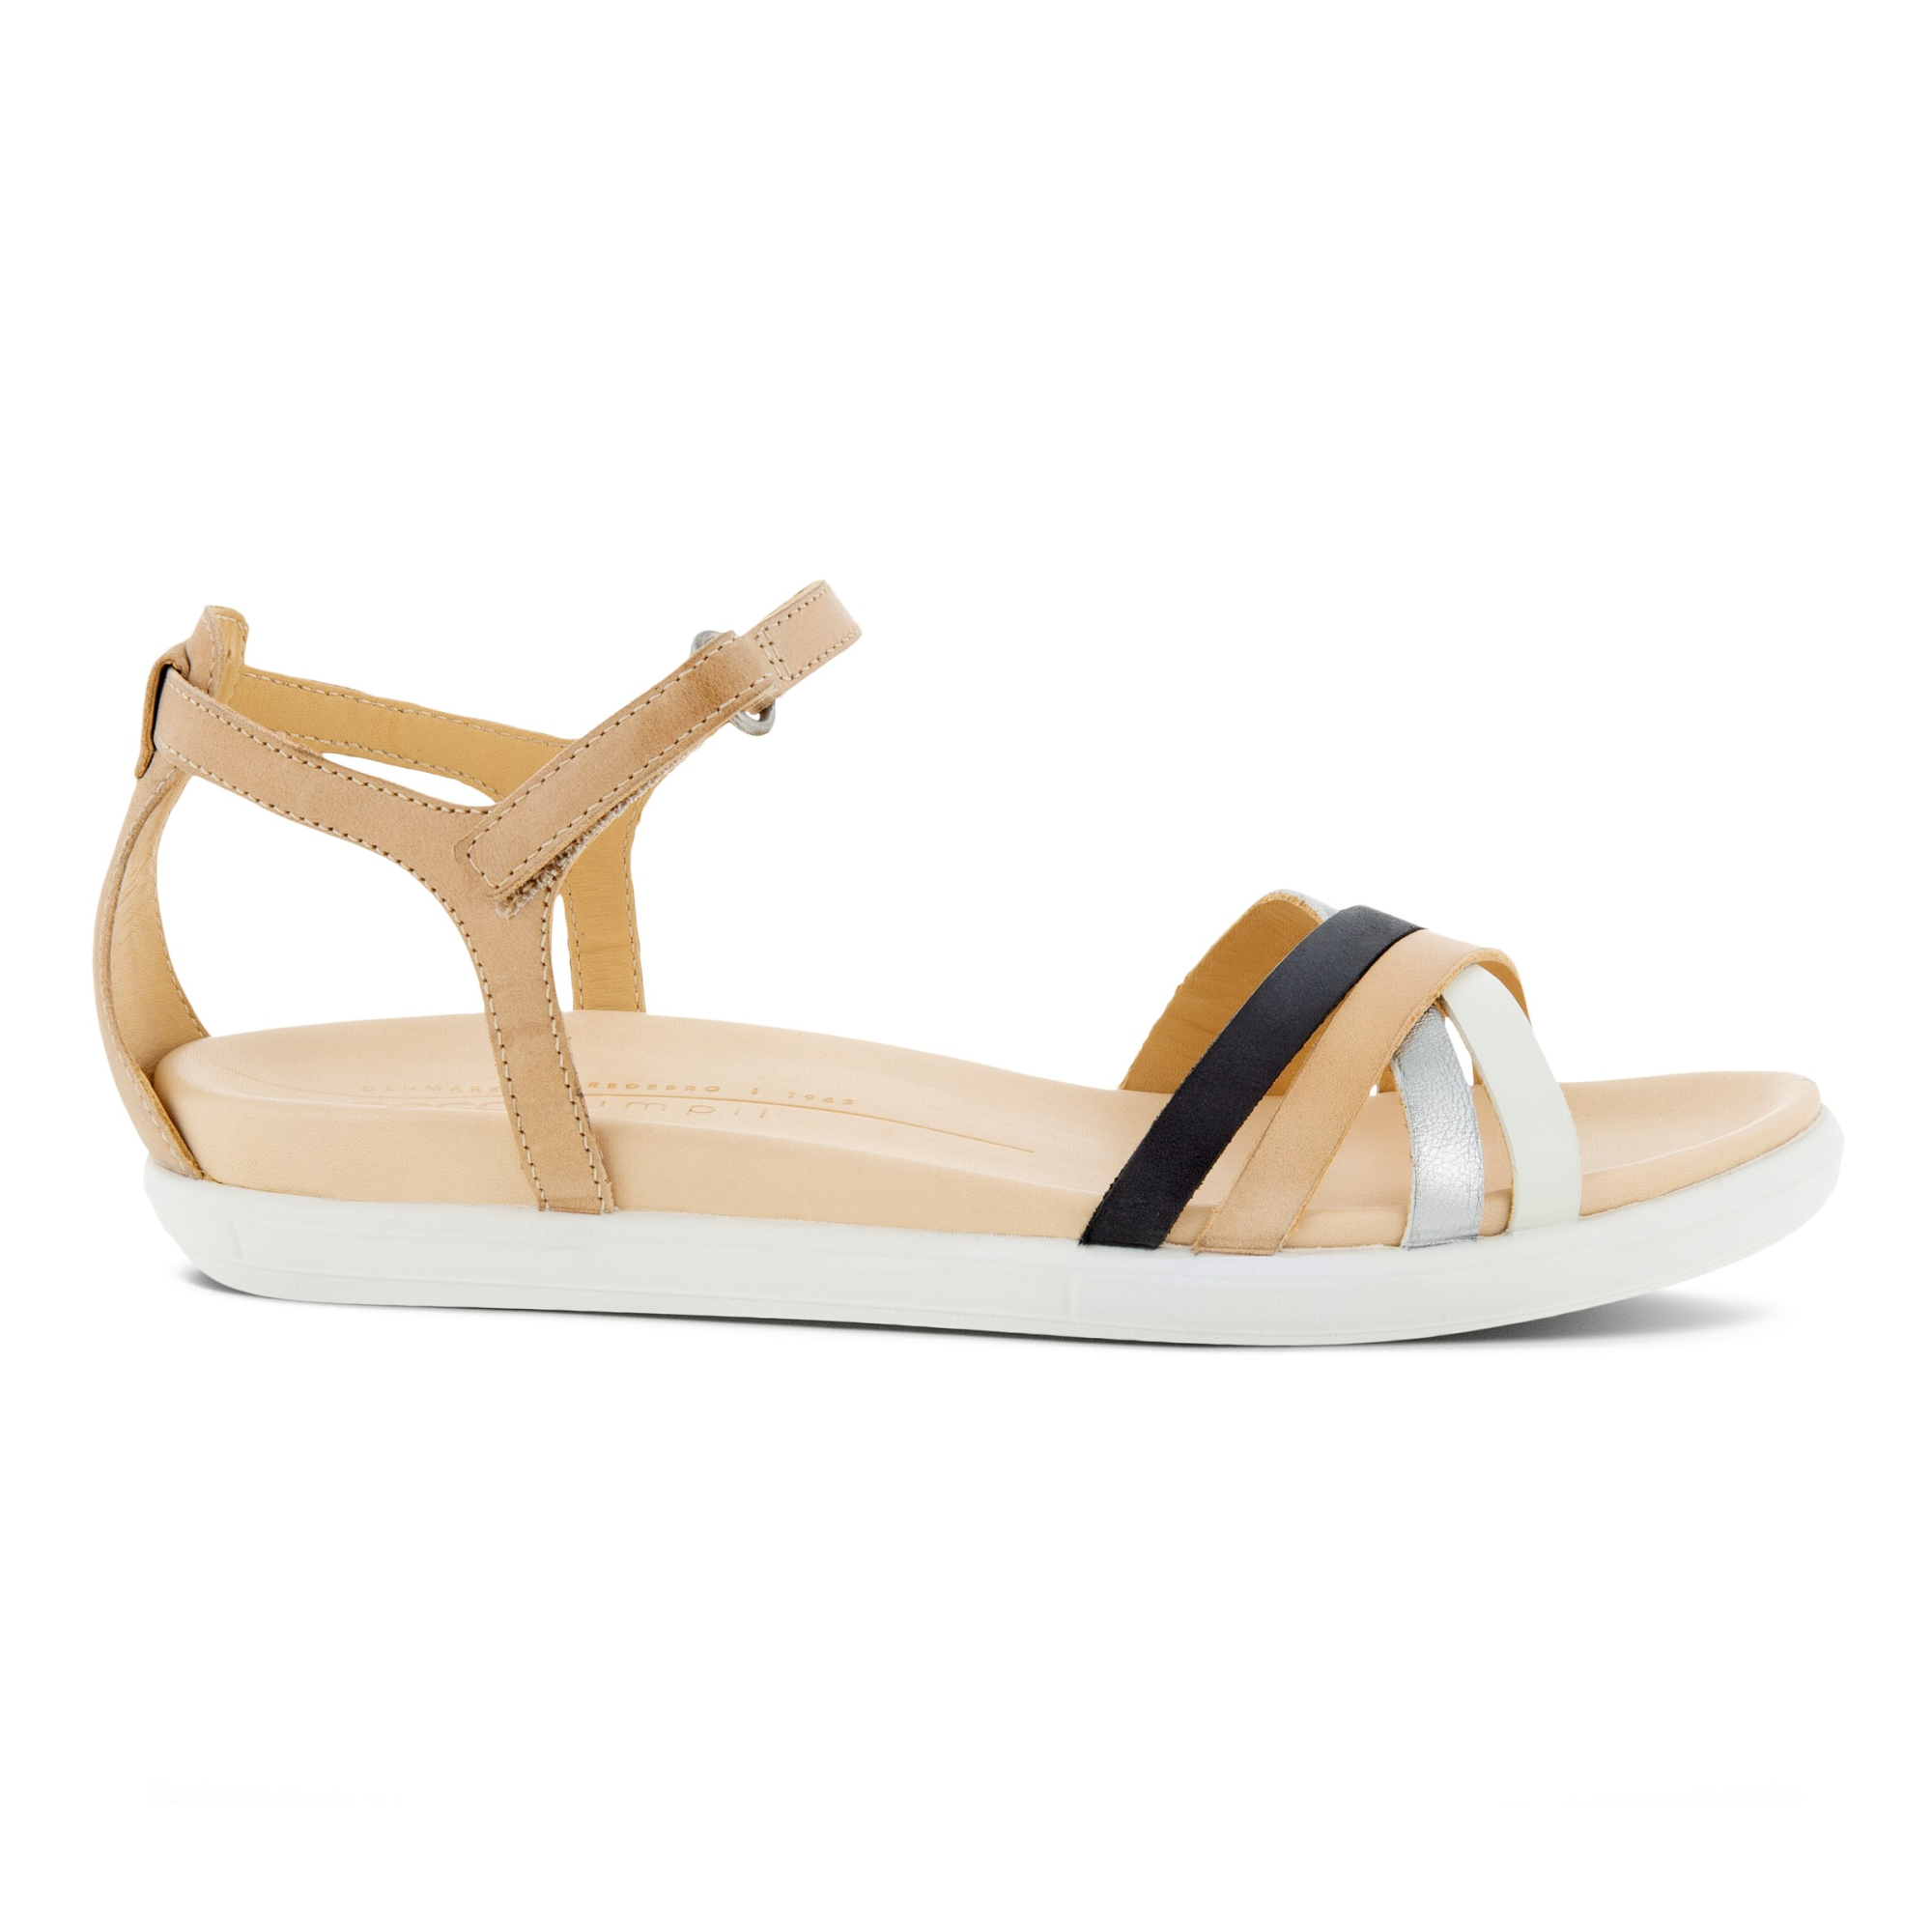 Påvirke succes Repressalier Ecco SIMPIL SANDAL Flat Sandal 43 - Products - Veryk Mall - Veryk Mall,  many product, quick response, safe your money!